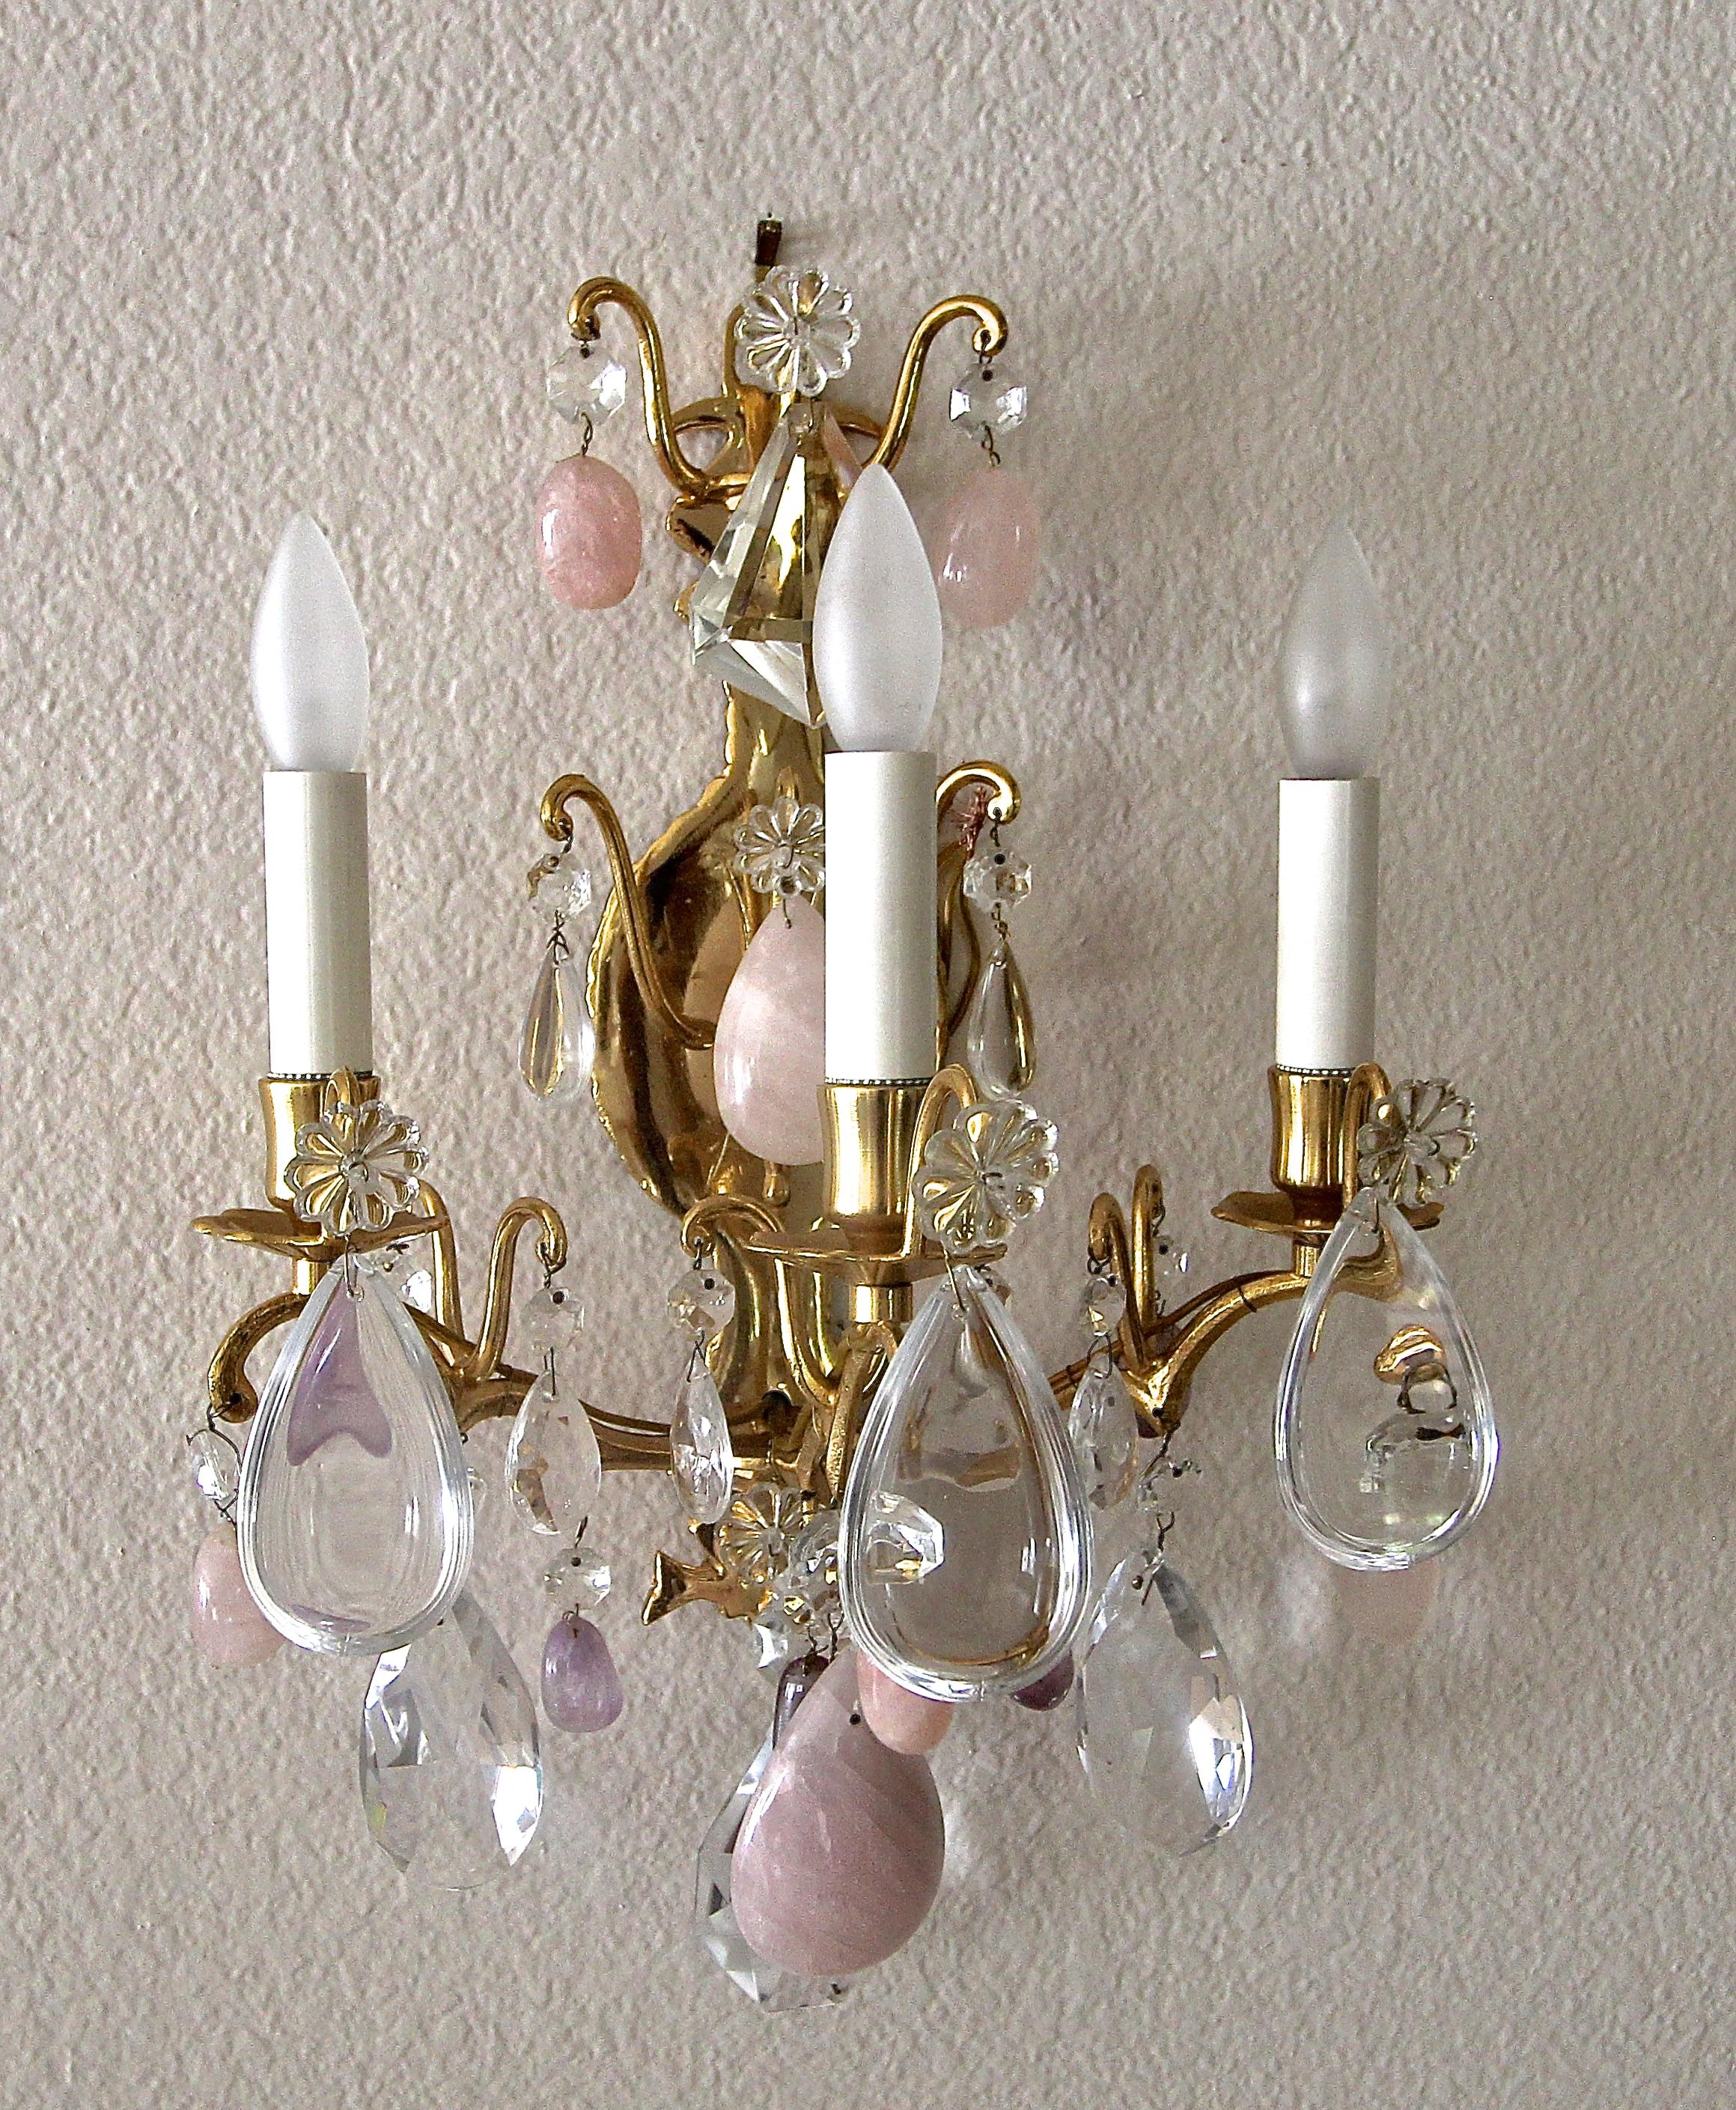 Mid-20th Century Pair of French Louis XV Style Rock Crystal and Brass Wall Light Sconces